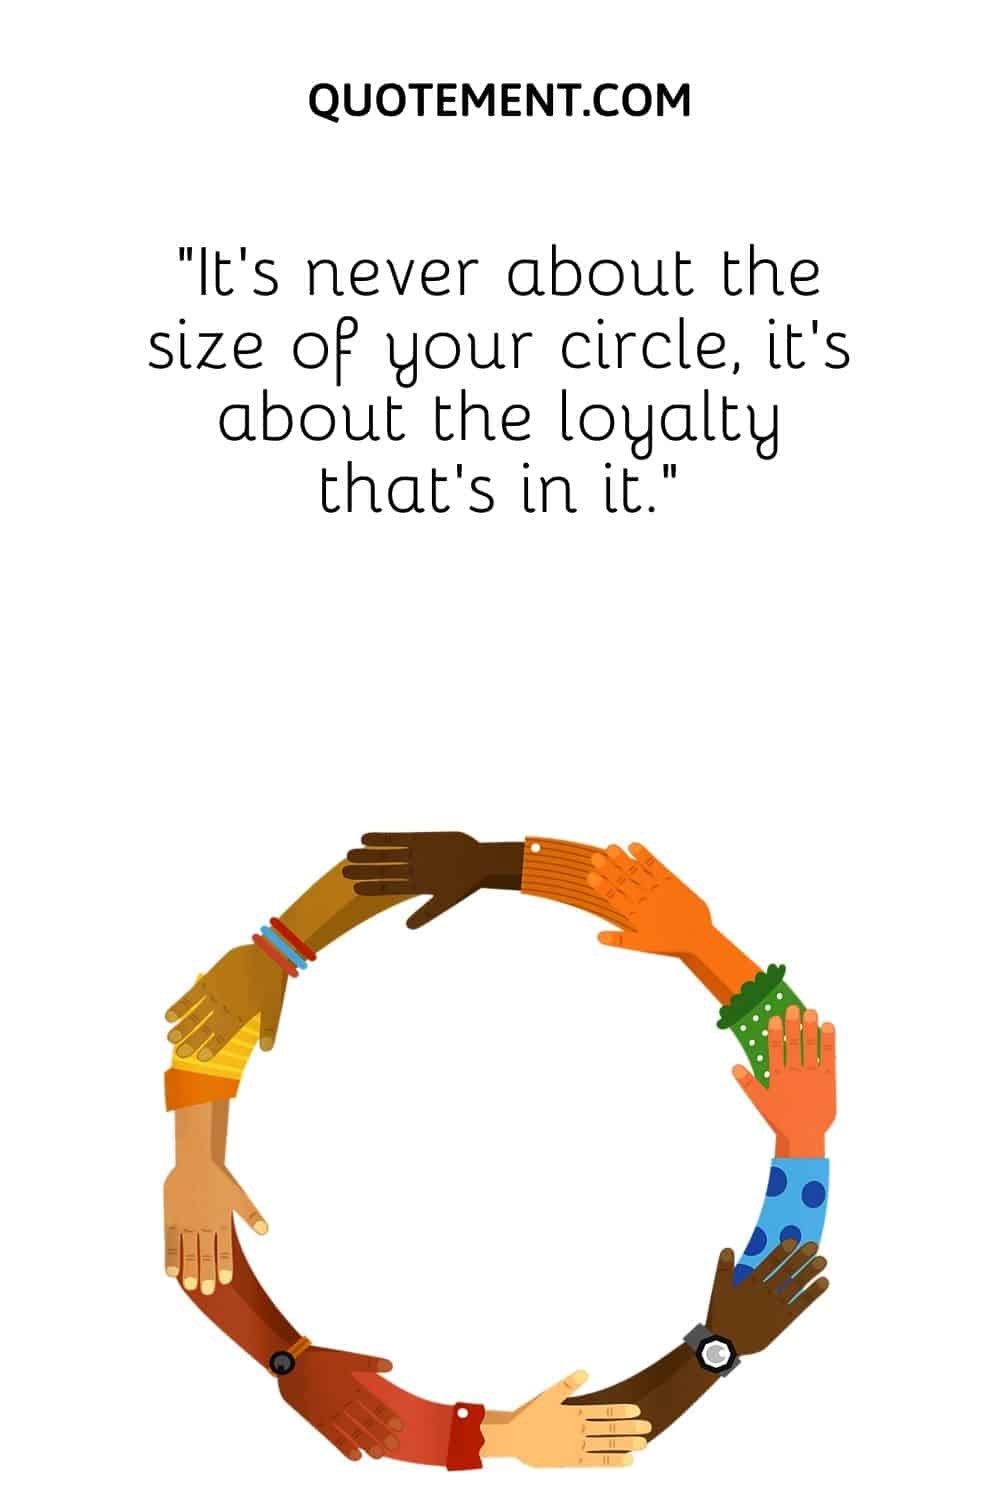 “It’s never about the size of your circle, it’s about the loyalty that’s in it.”